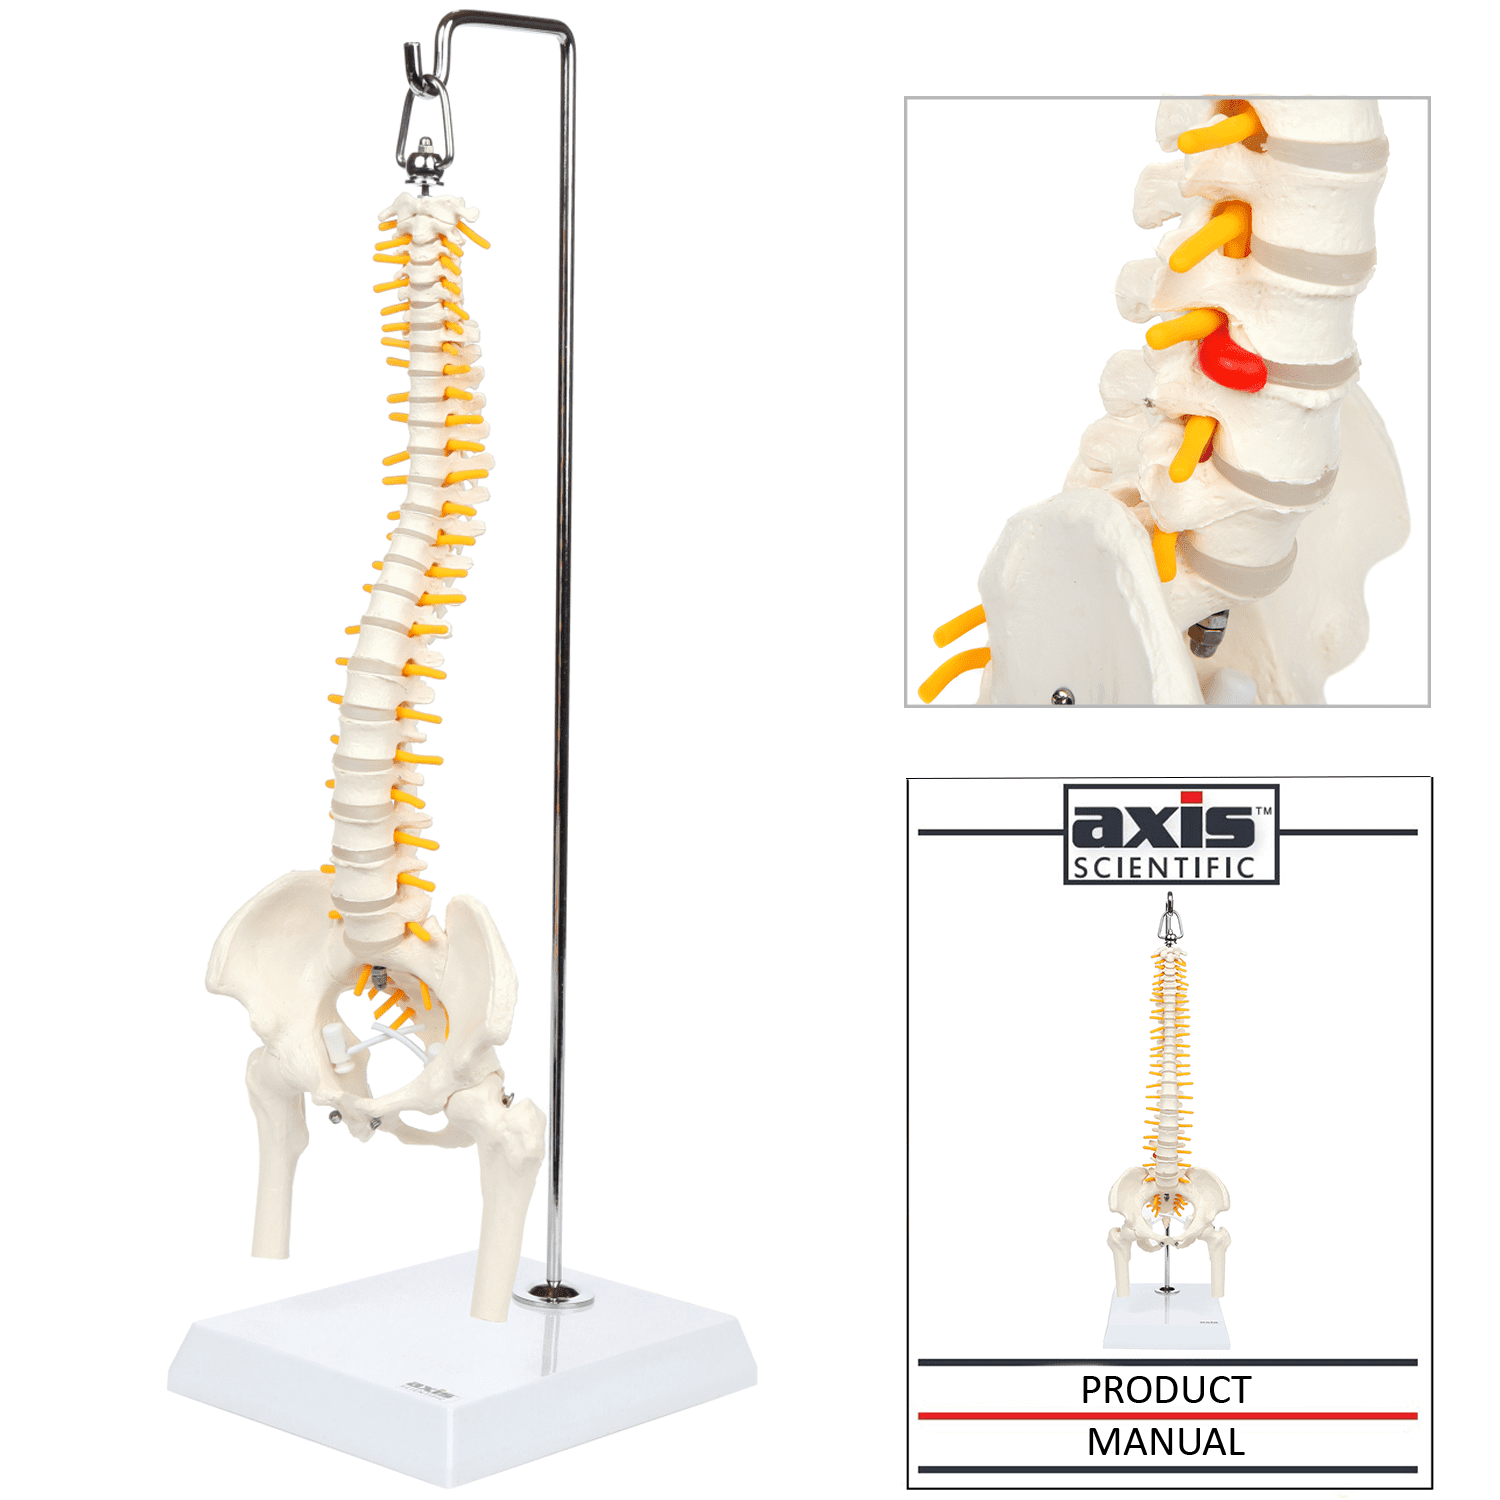 Flexible Spine Caudal Vertebra Anatomical Model with Spinal Nerves for Science Classroom Teaching Spine Anatomical Model Vertebral Column Model 